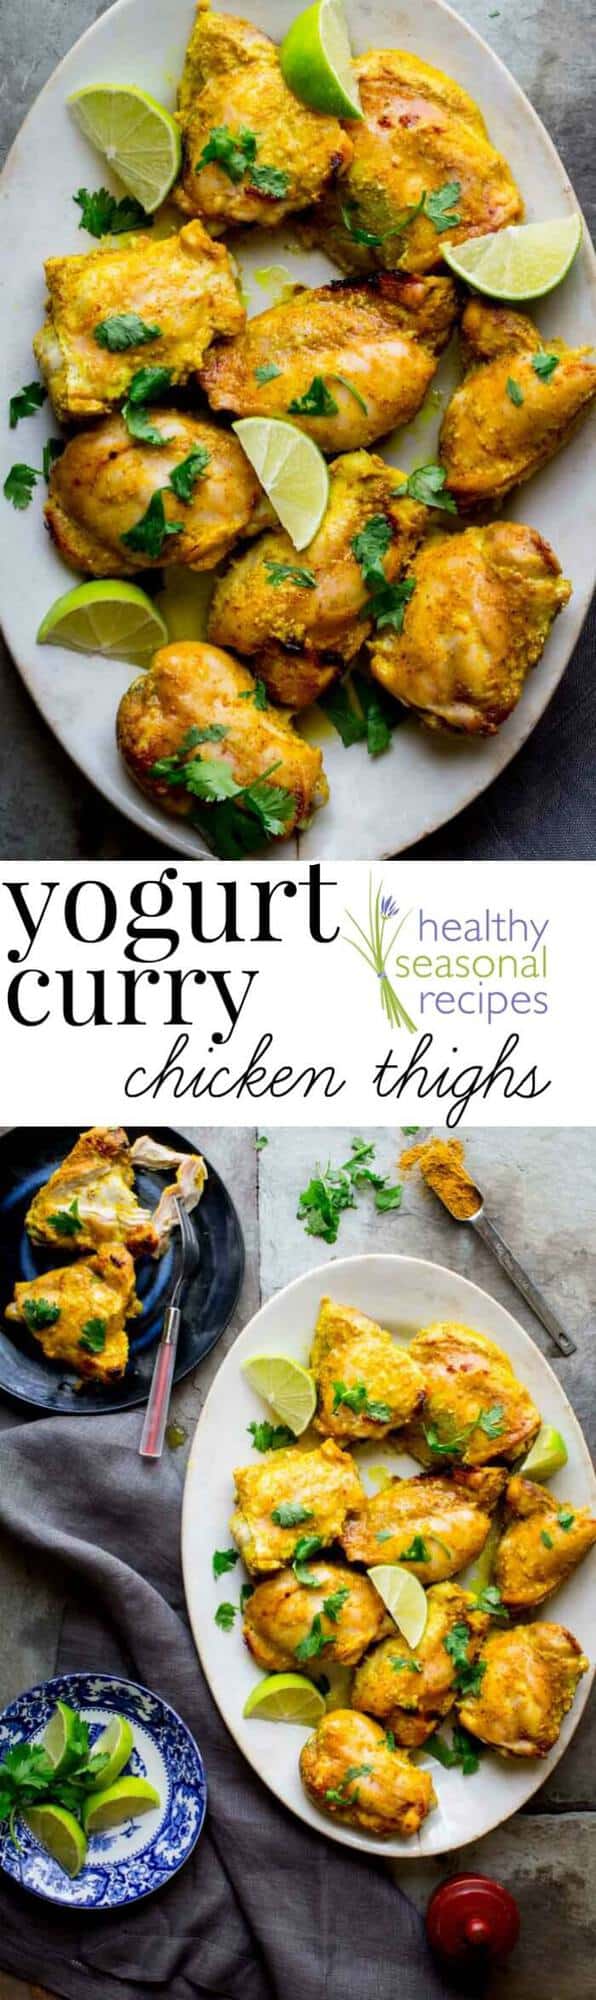 2 Chicken and Yogurt curry photos collaged together with text overlay